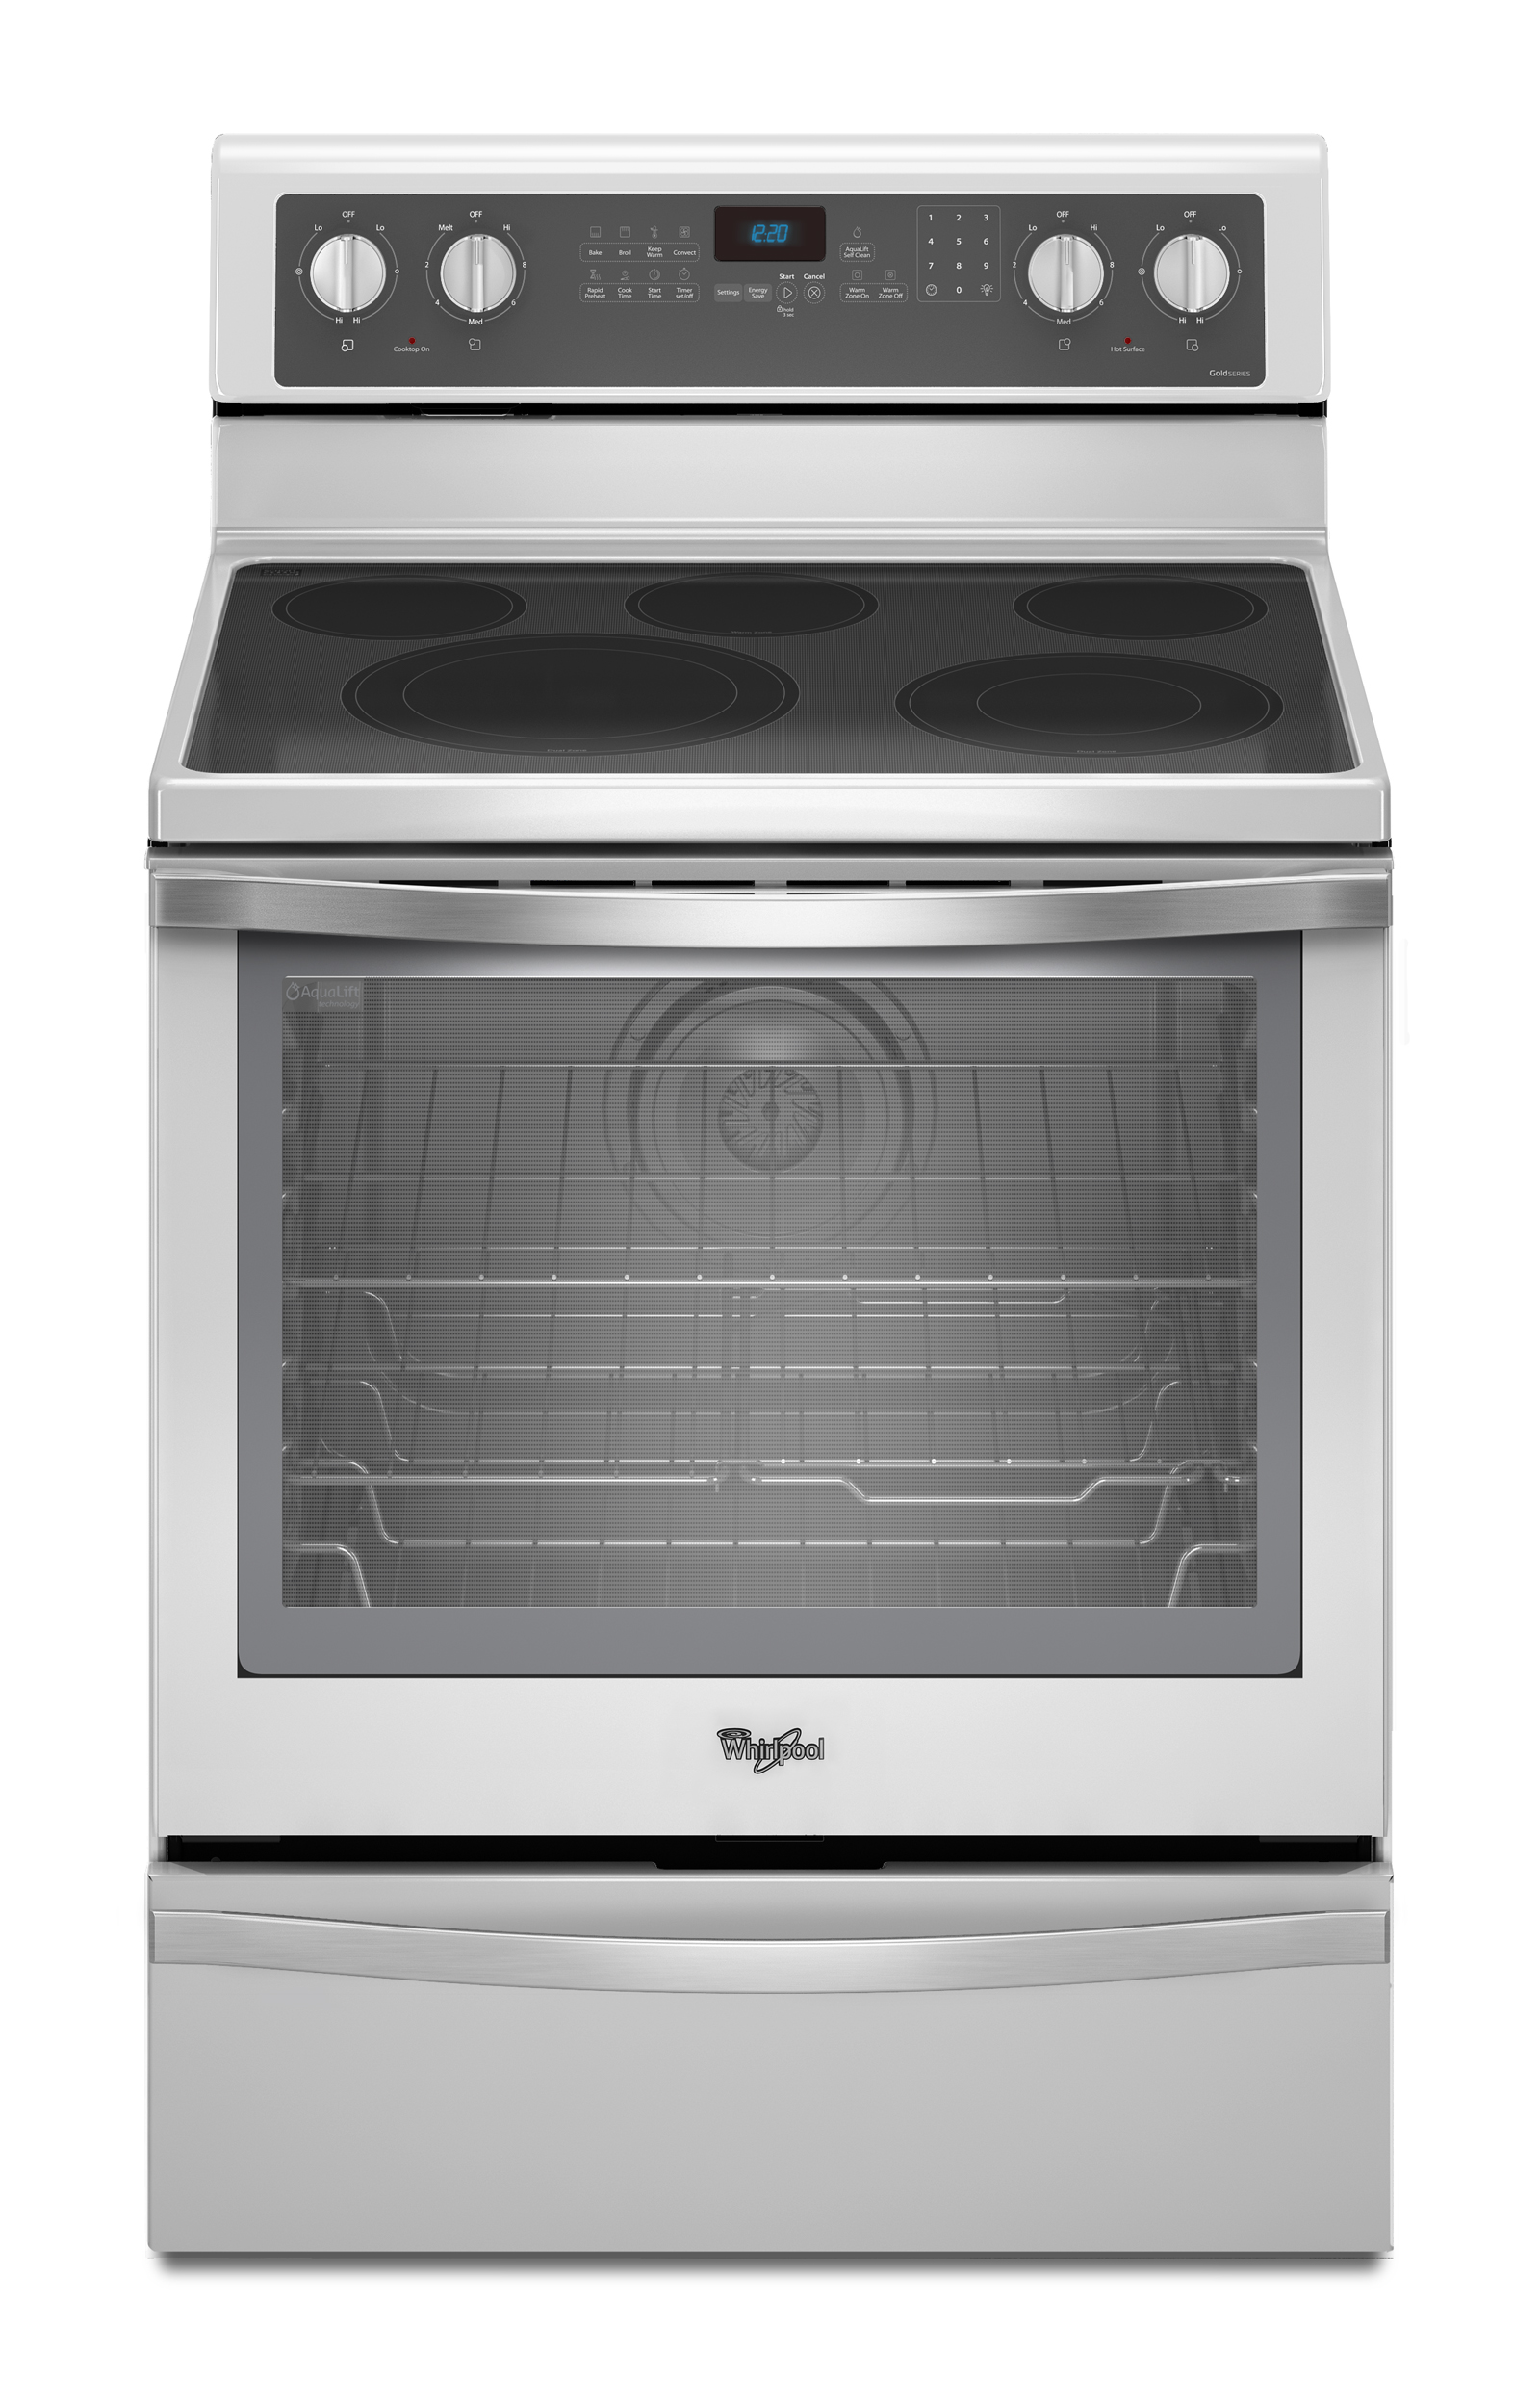 Whirlpool WFE715H0EH 6.4 cu. ft. Freestanding Electric Range   White